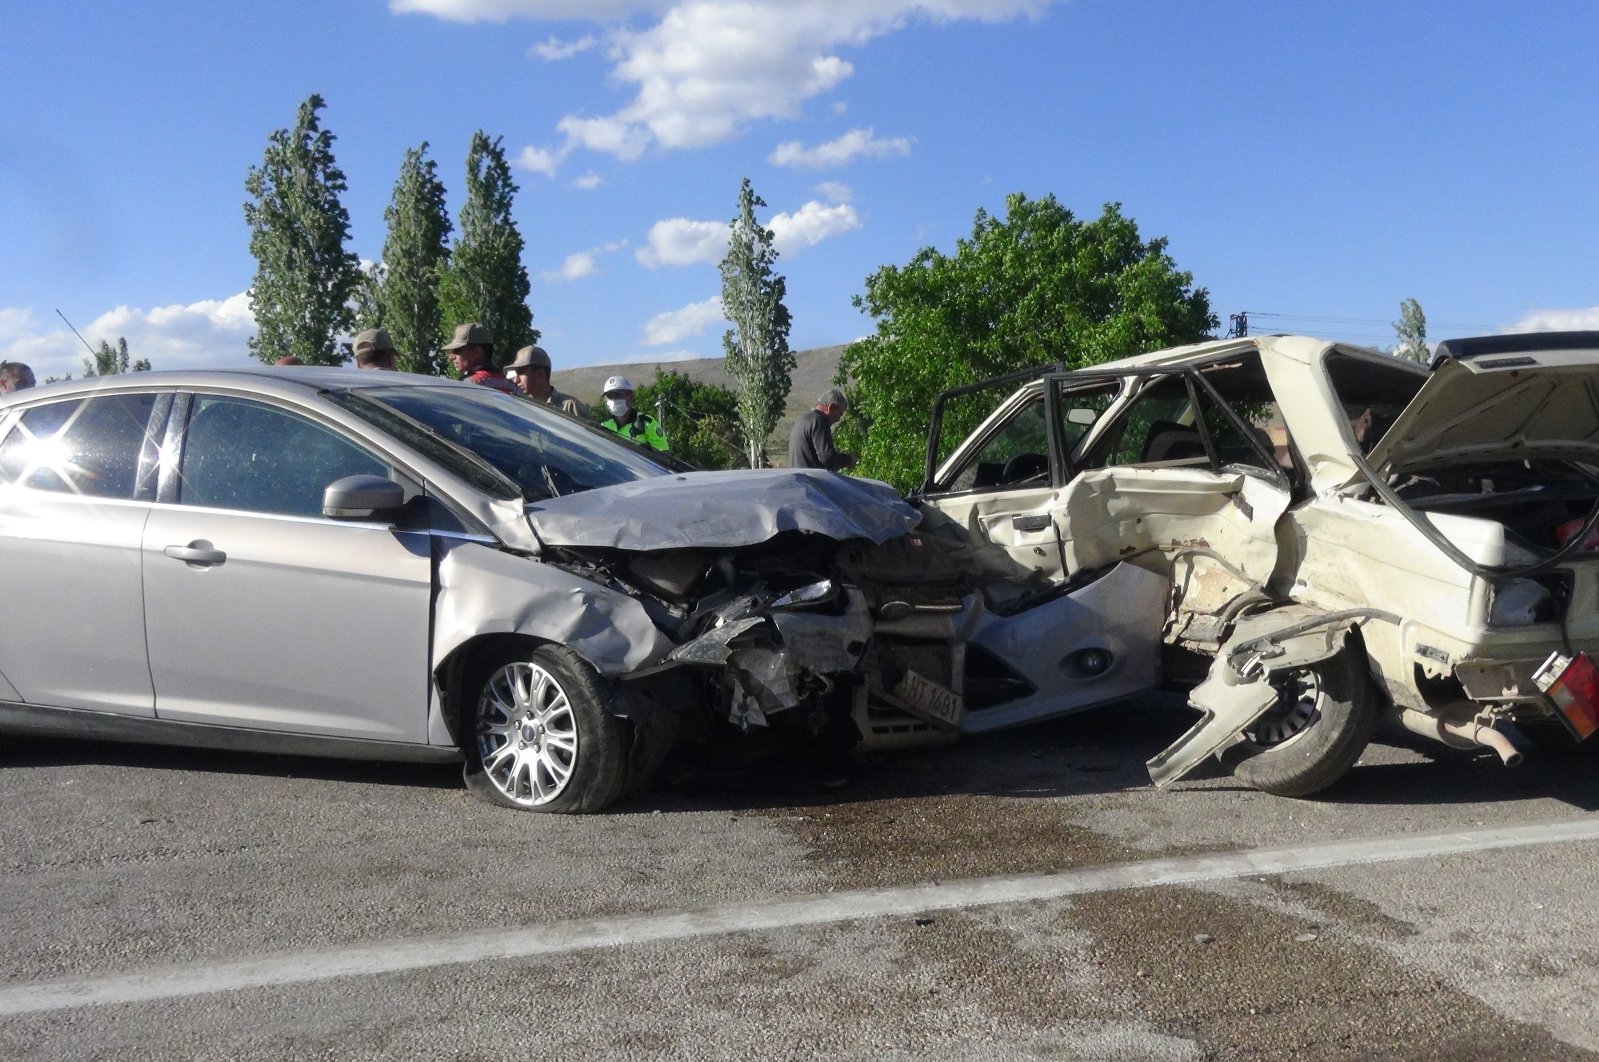 Wreckage of two cars that crashed into each other in Kahramanmaraş, Turkey, May 30, 2020. (İHA Photo)